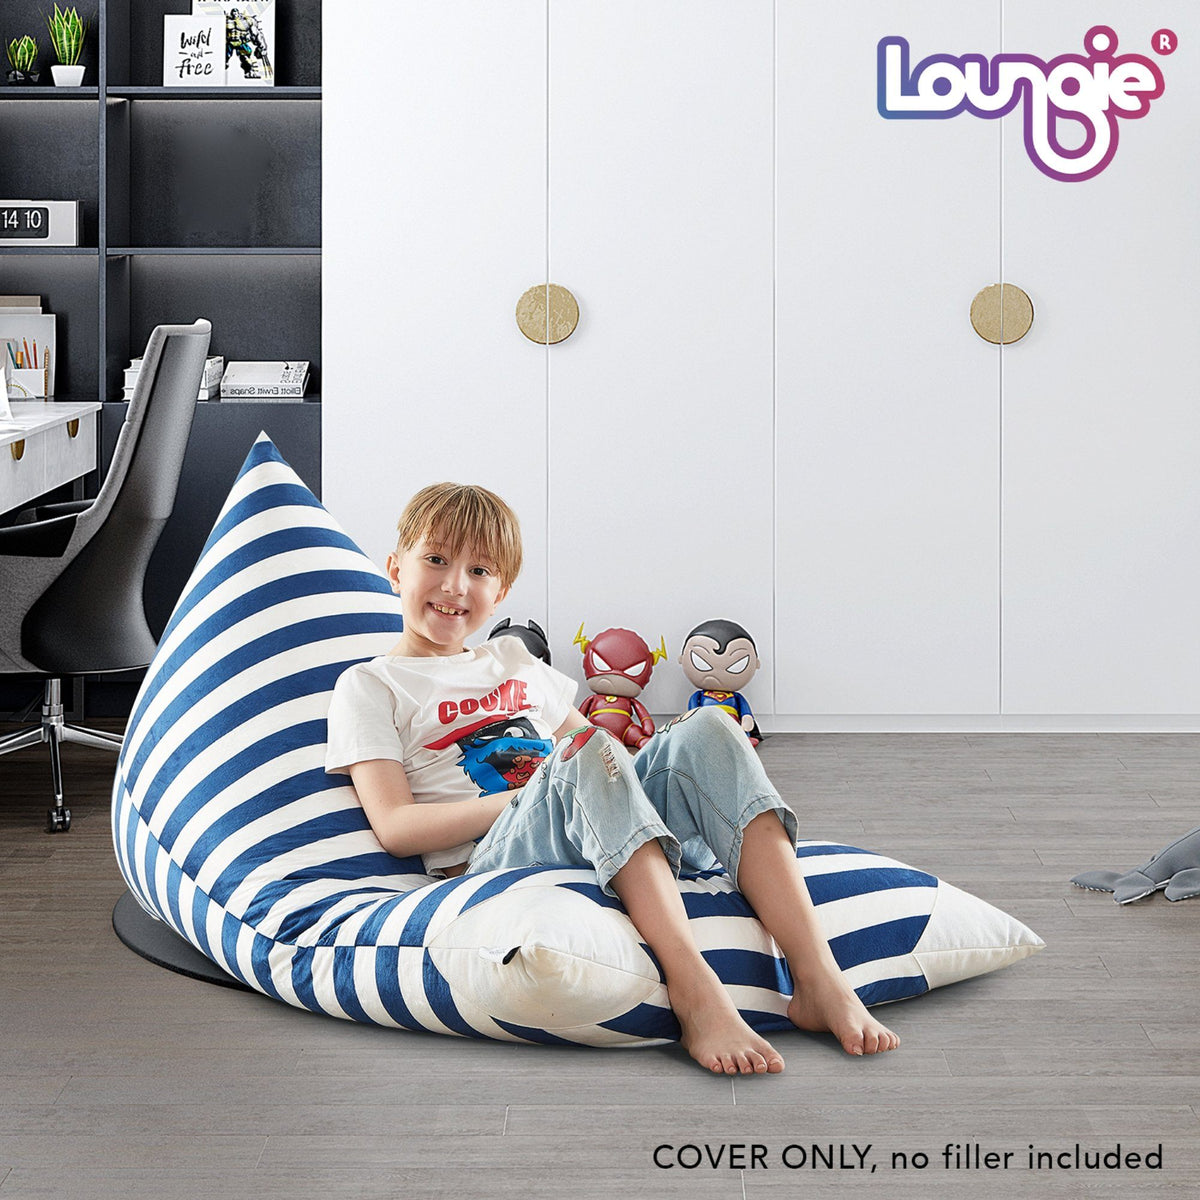 55 Bean Bag Cover Striped Navy by Loungie